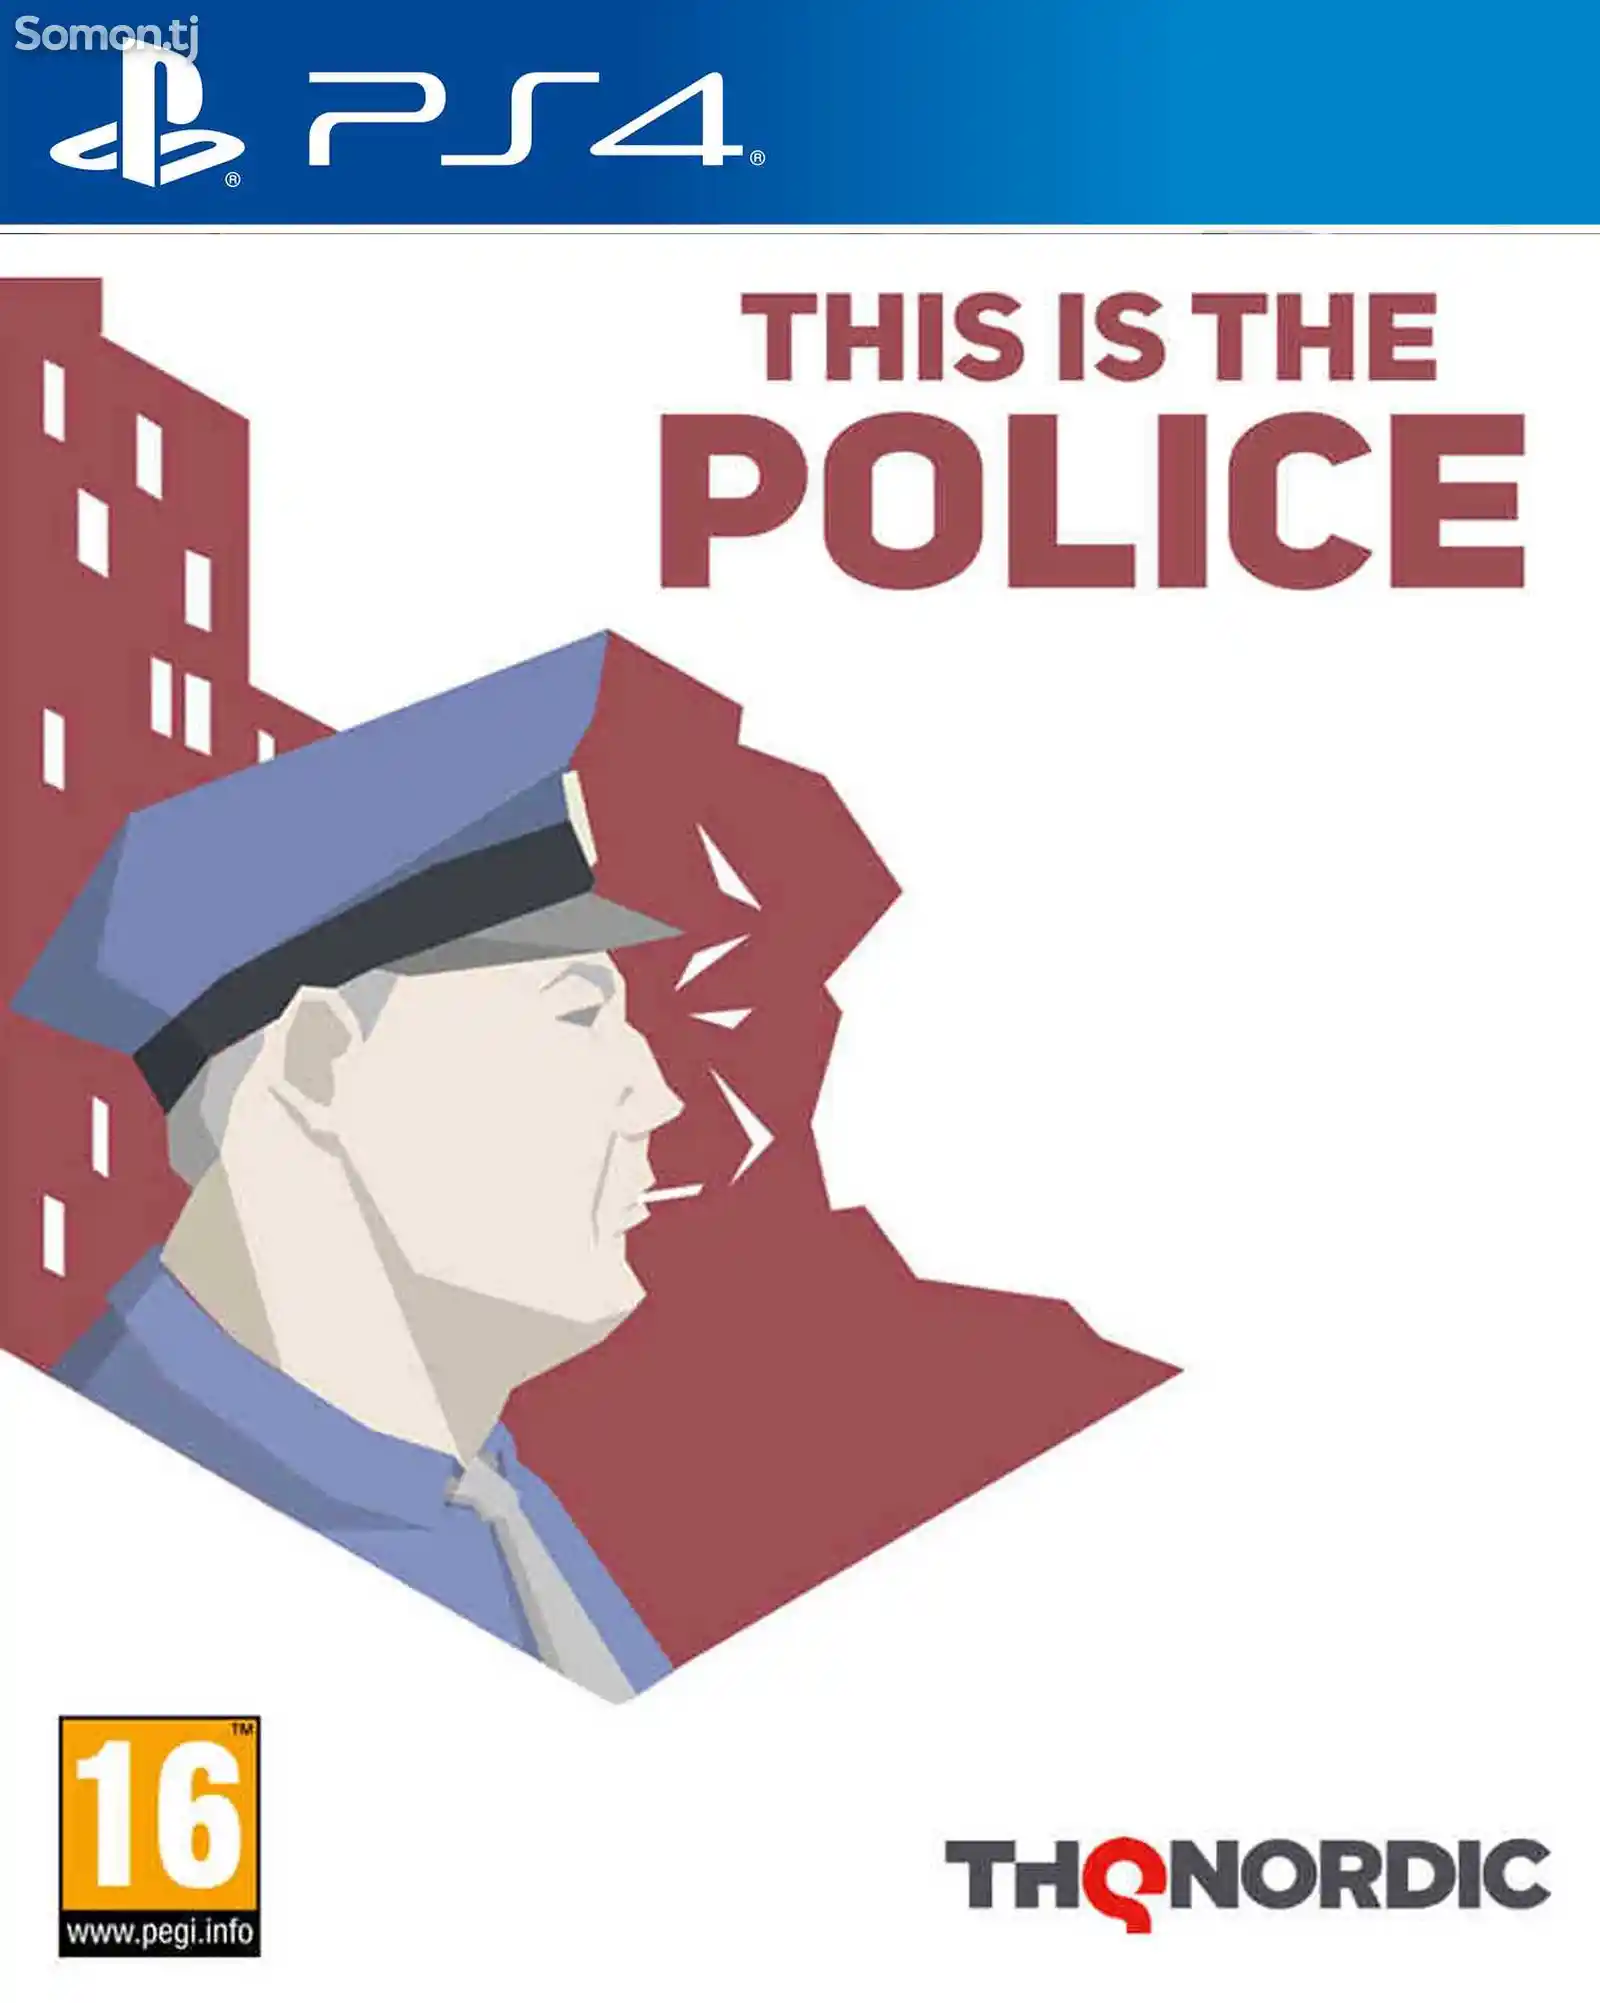 Игра This is the police для PS-4 / 5.05 / 6.72 / 7.02 / 7.55 / 9.00 /-1